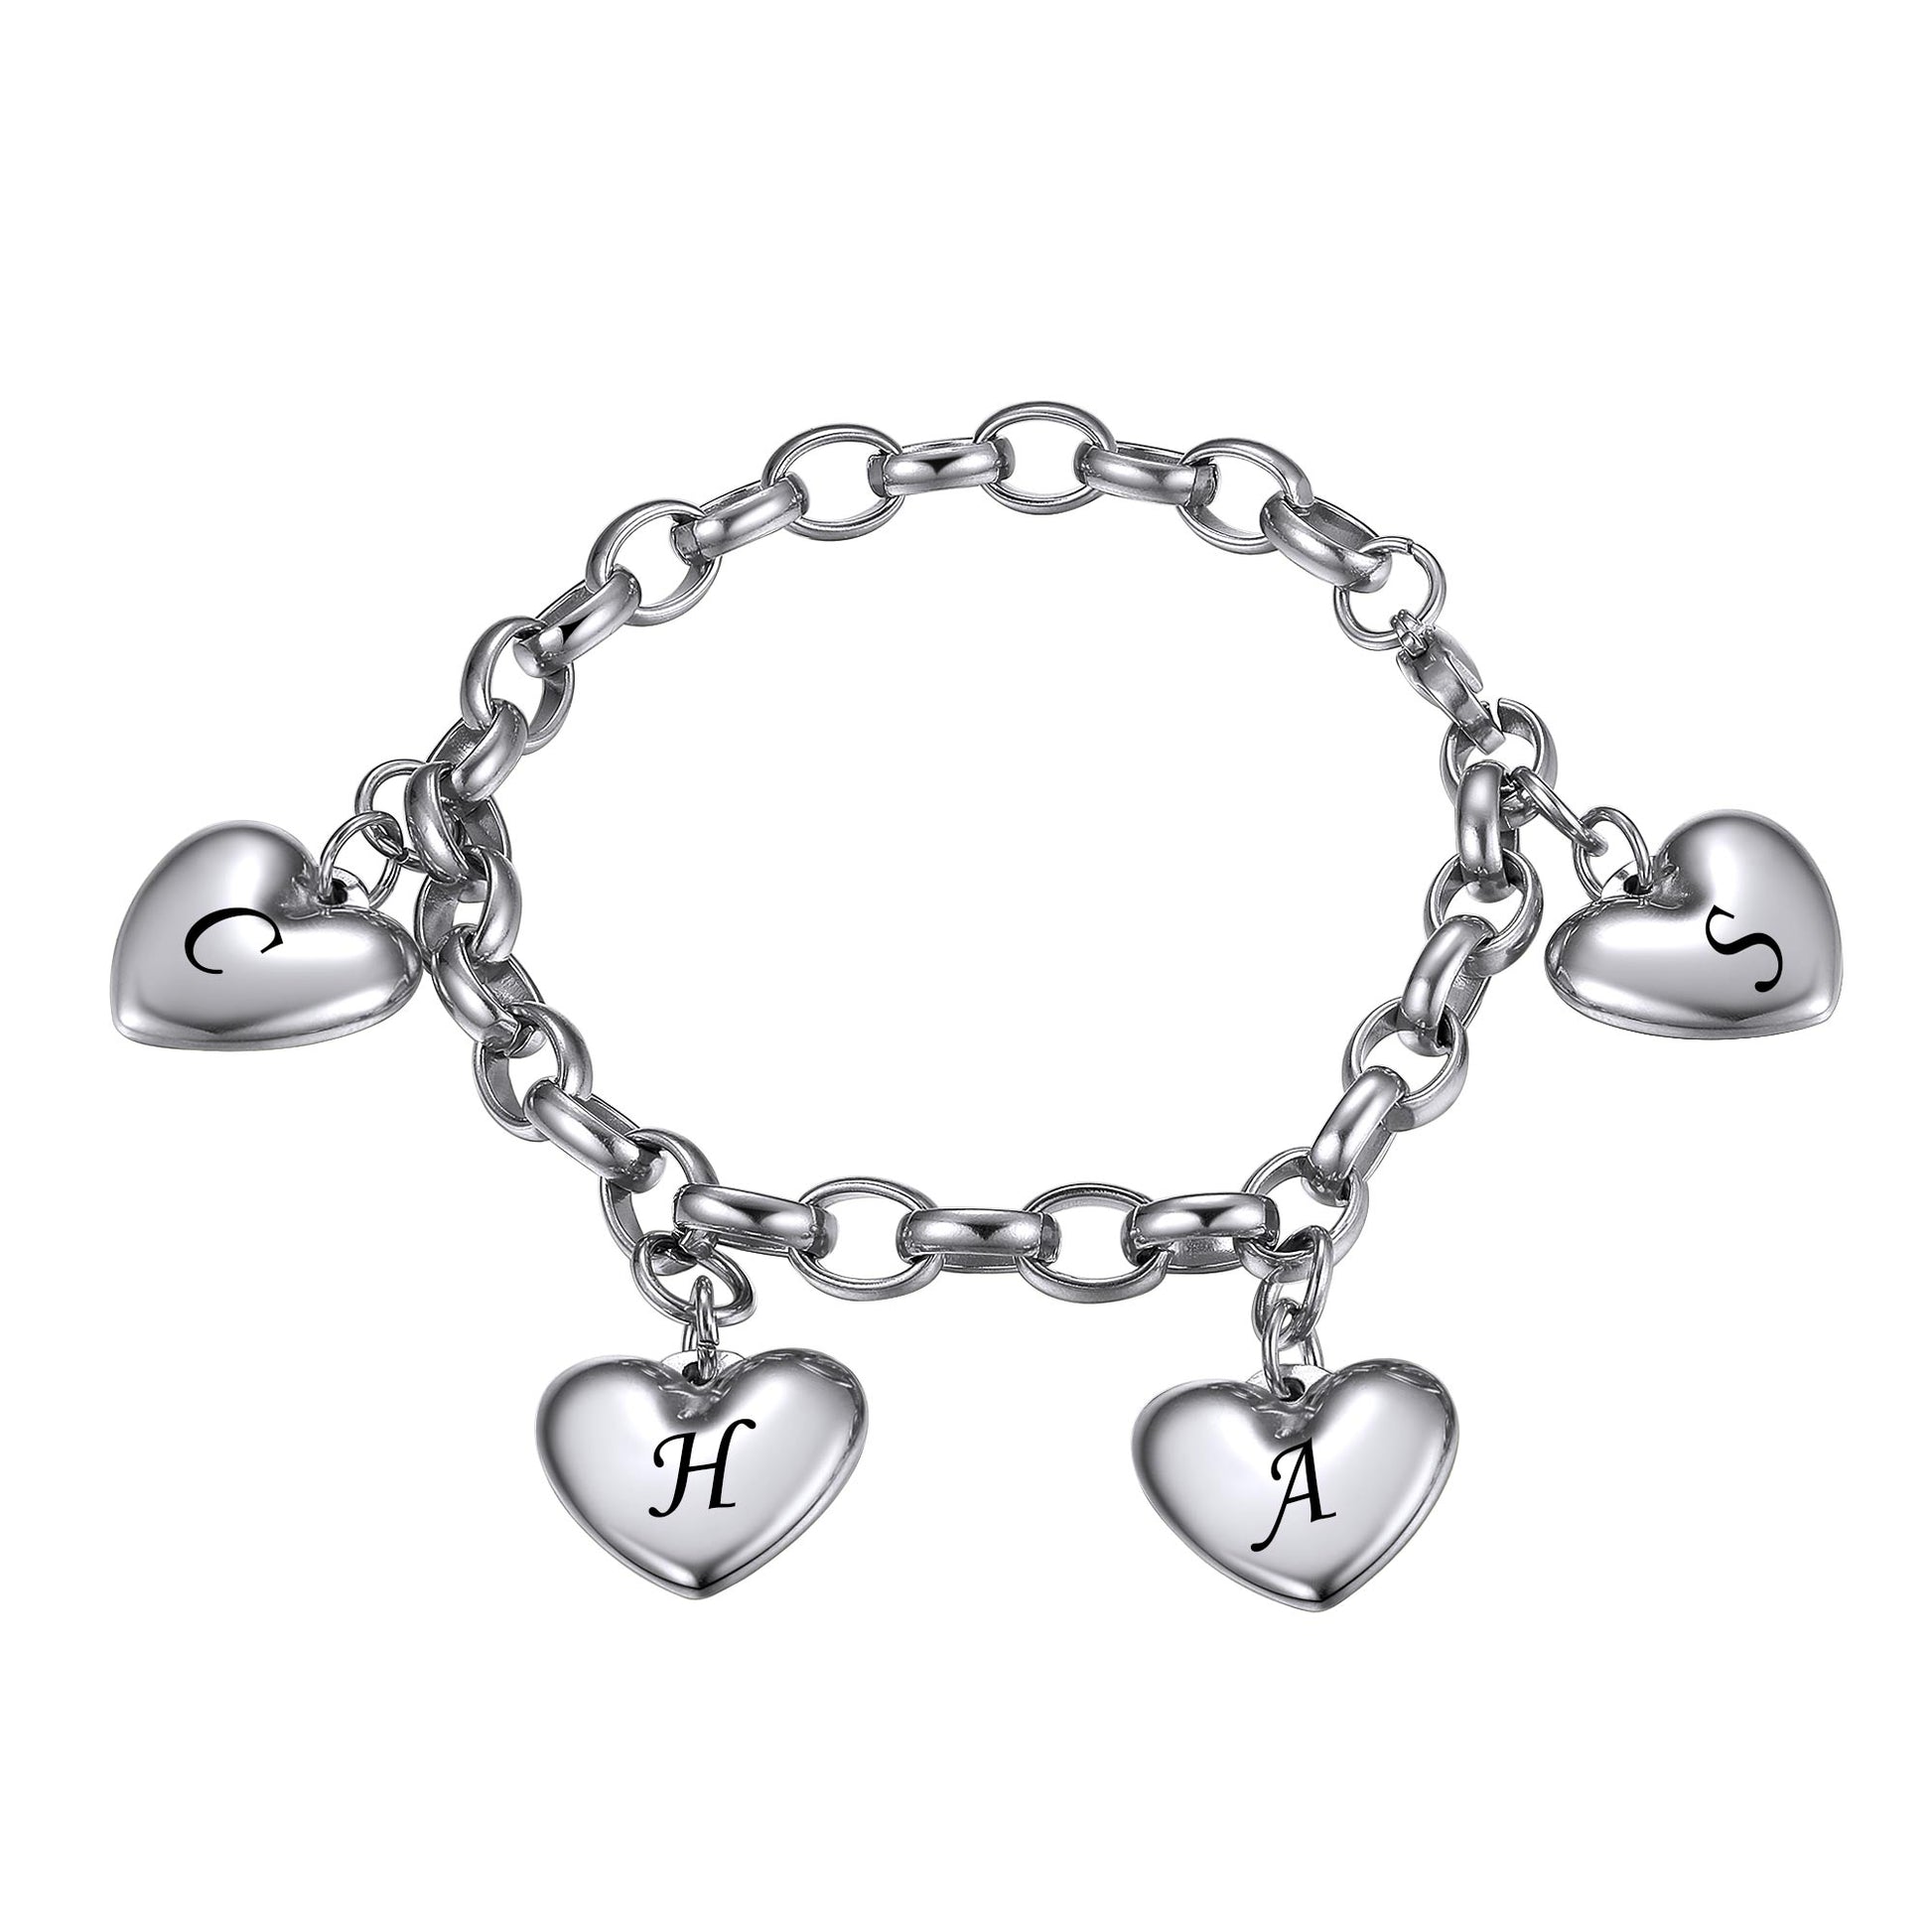 Personalized Engraved Hearts Charm Bracelet 4 heart